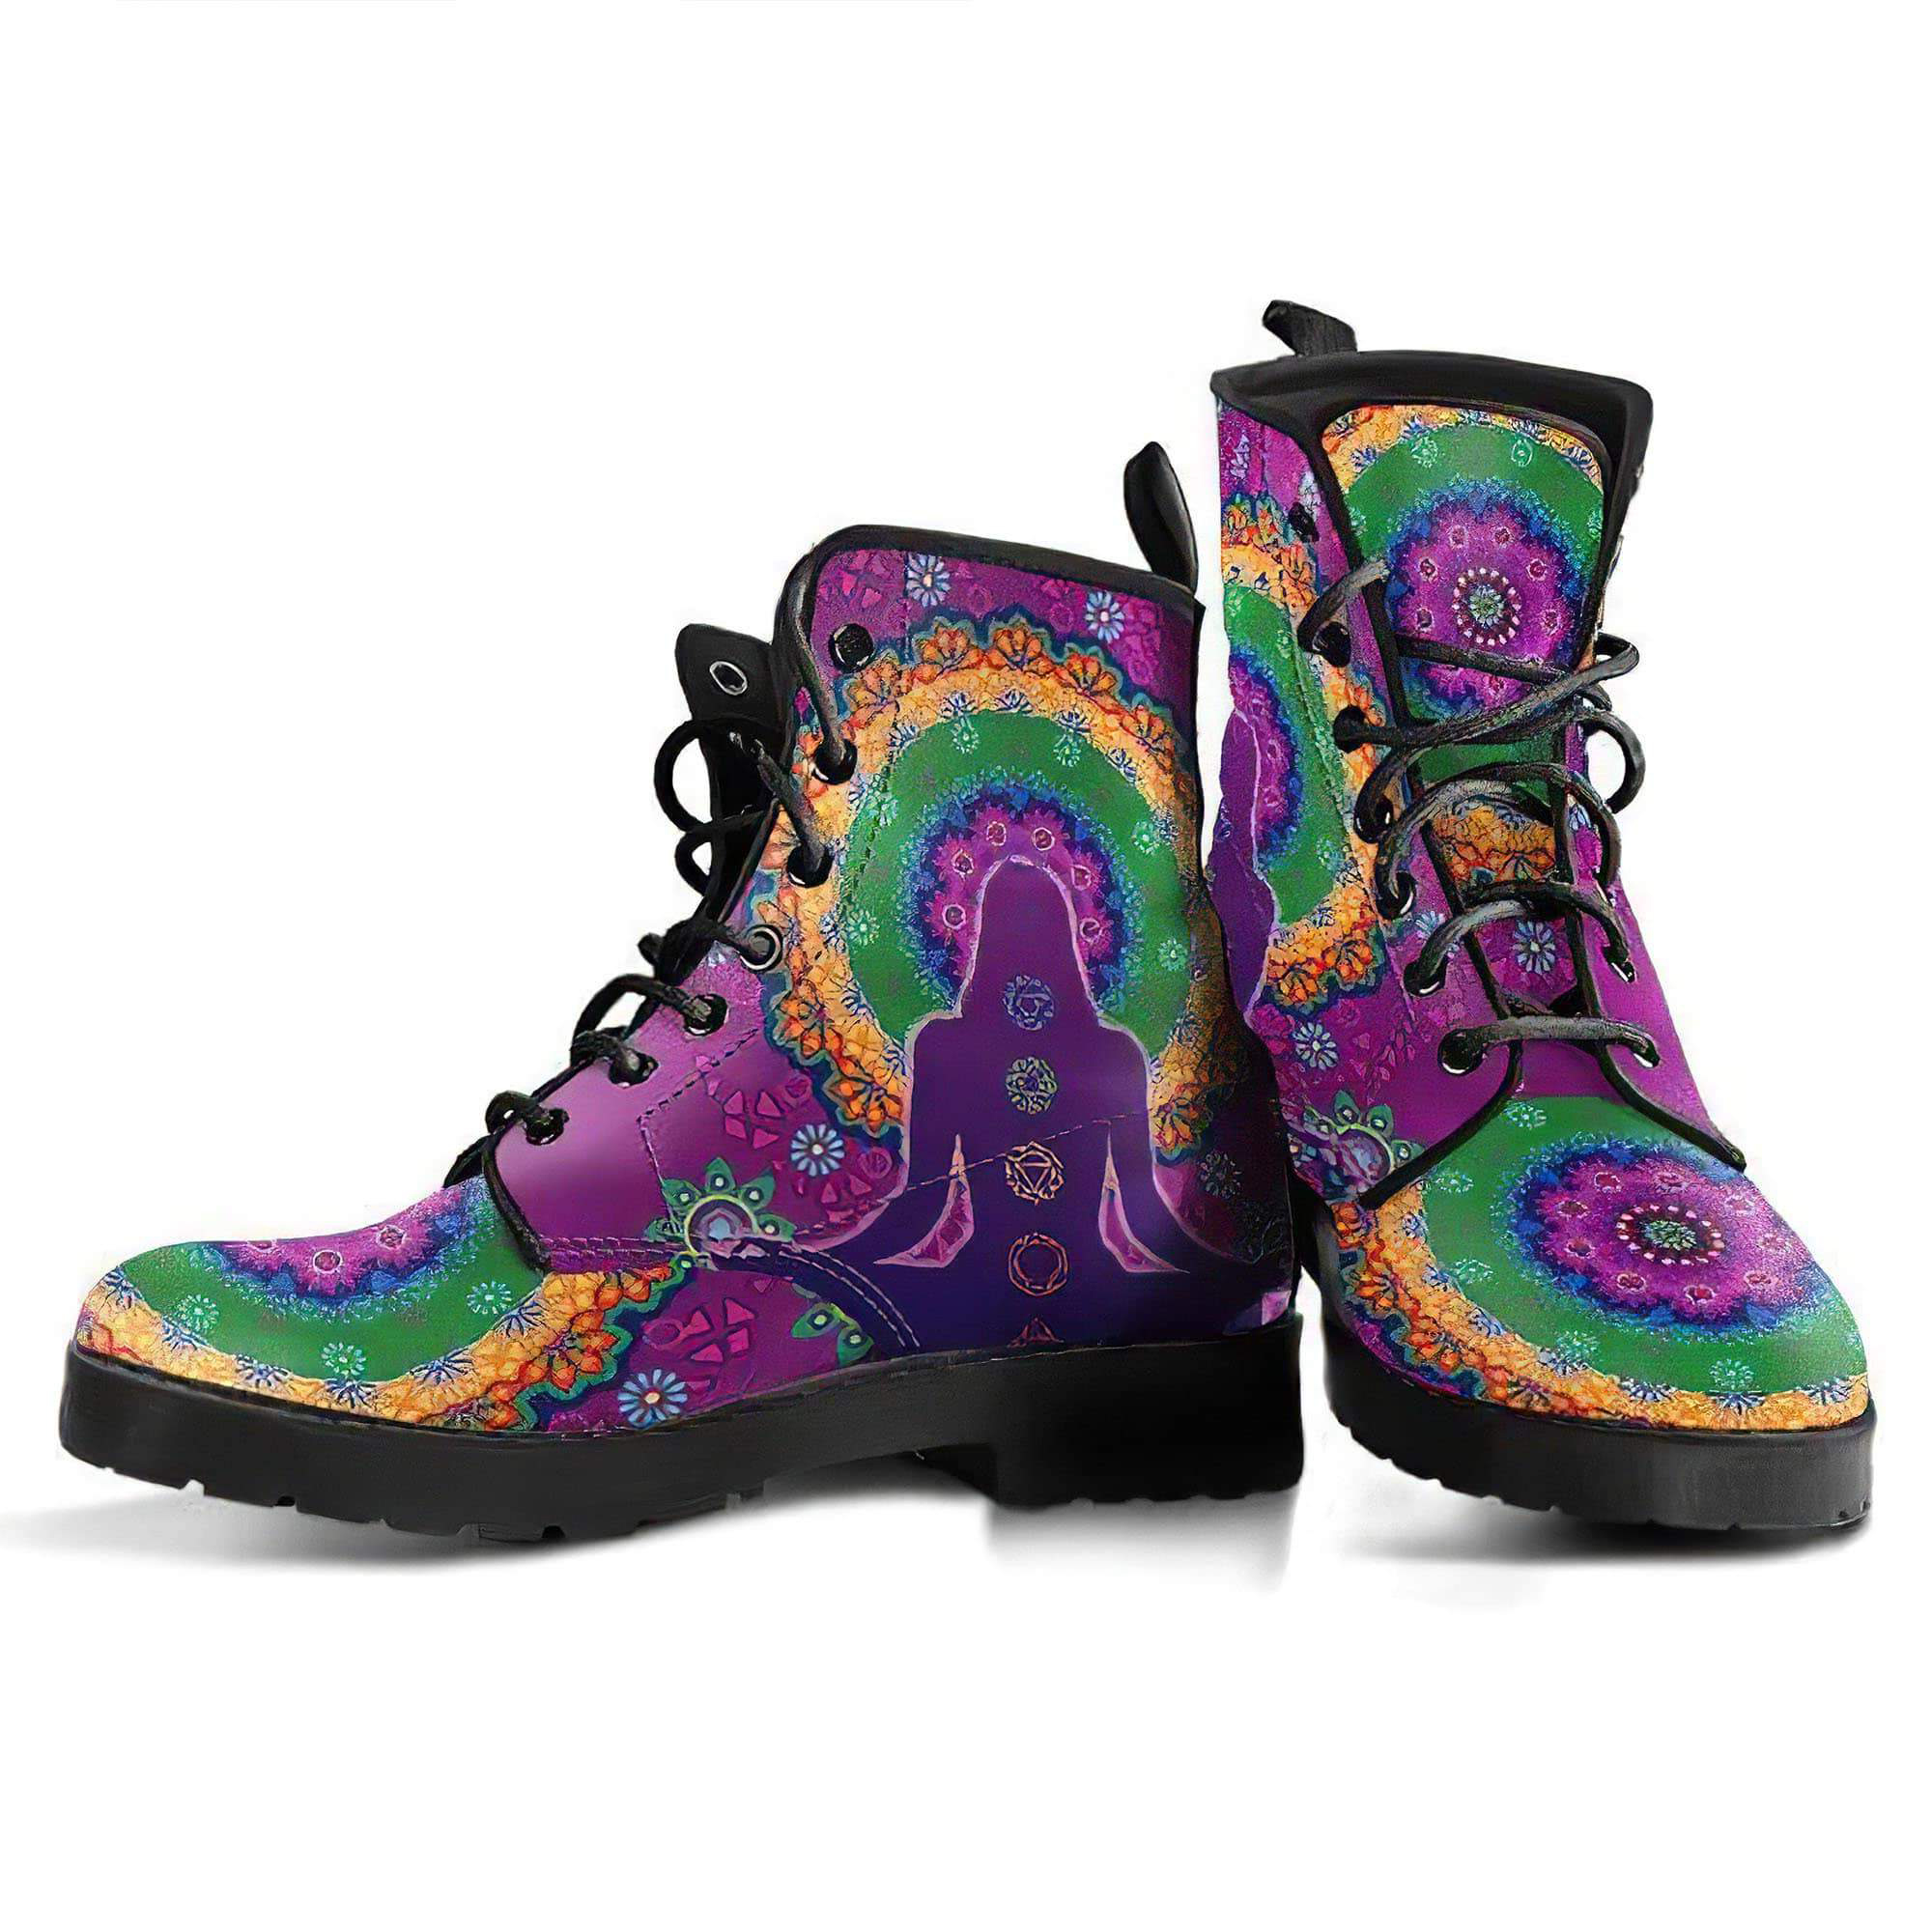 yoga-chakra-handcrafted-boots-women-s-leather-boots-12051985694781.jpg